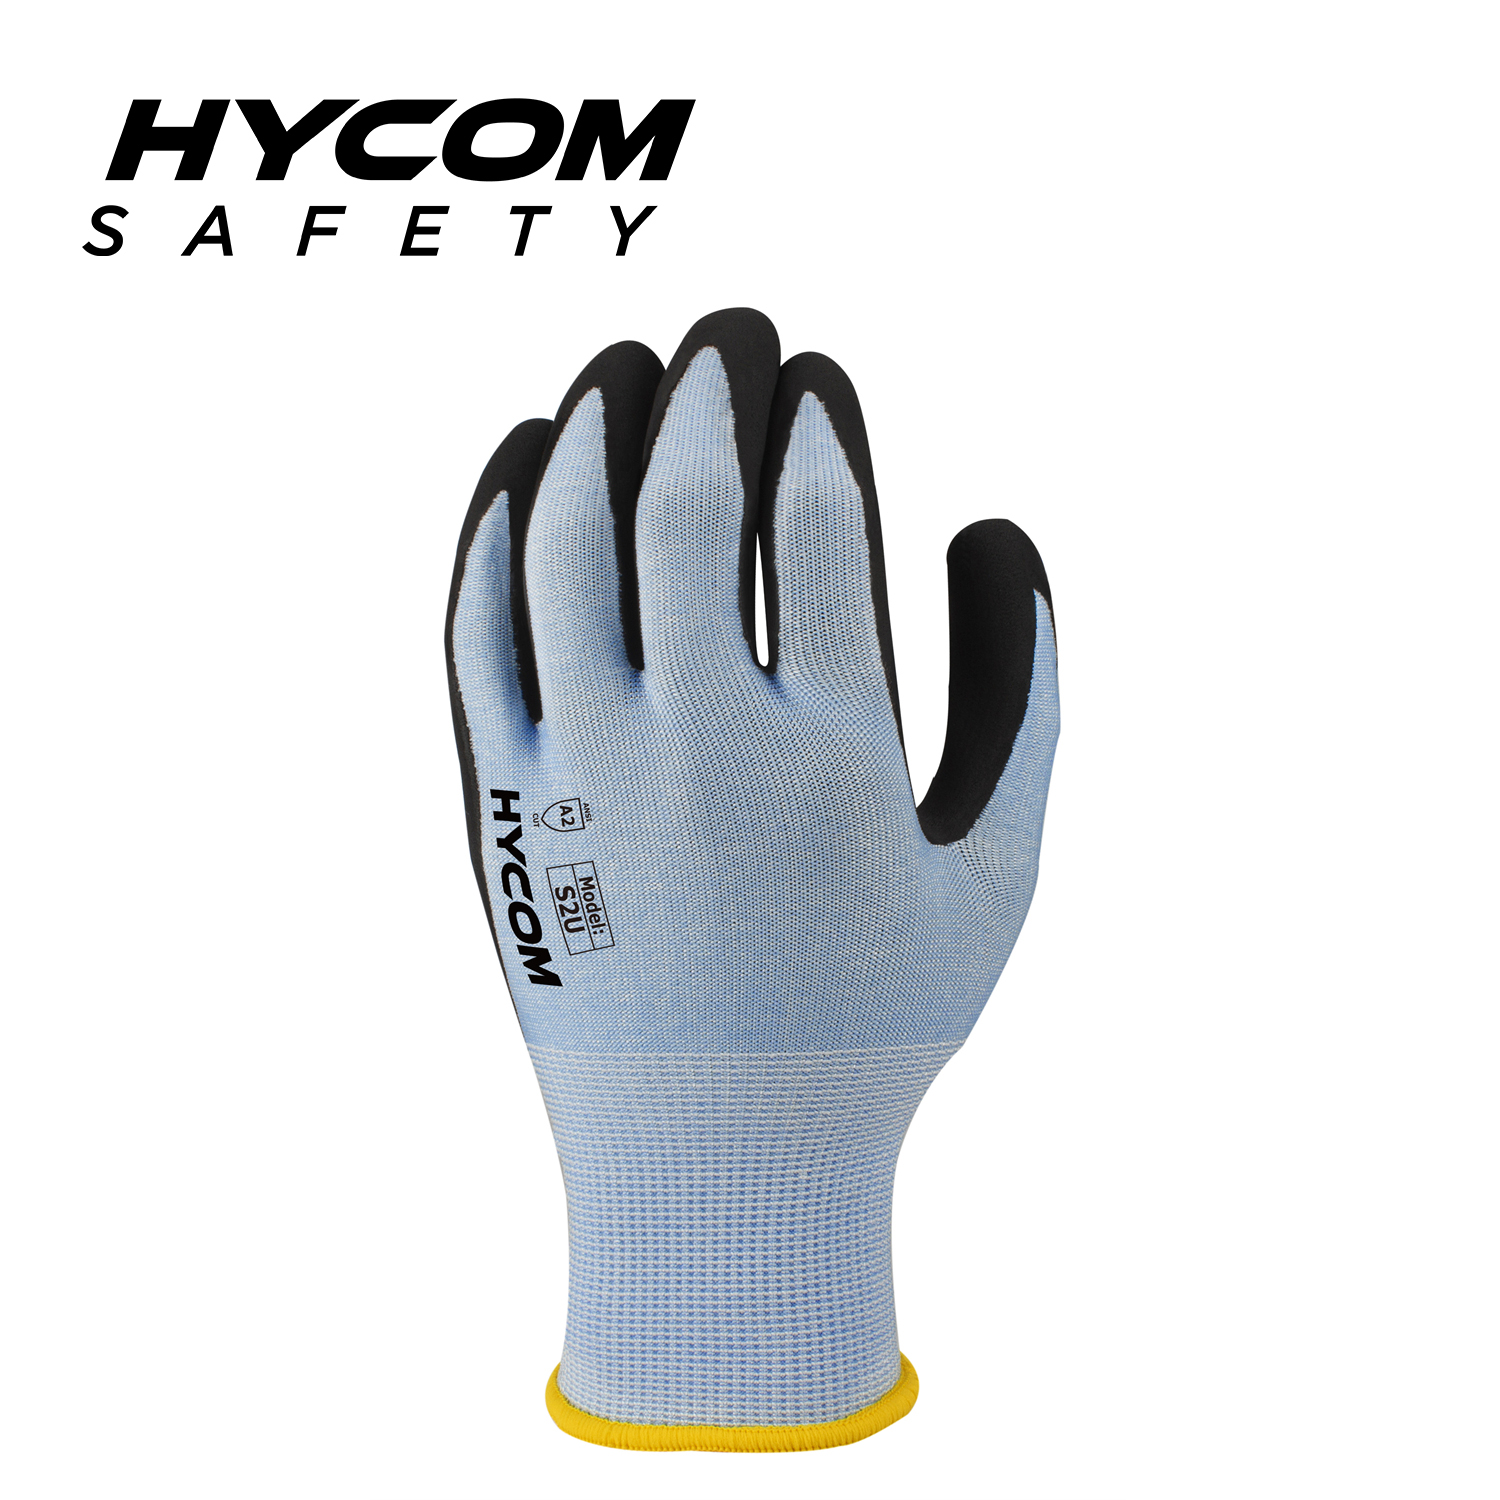 HYCOM 18G ANSI 2 Cut Resistant Glove with Palm Nitrile Coating Super Thiner Work Gloves